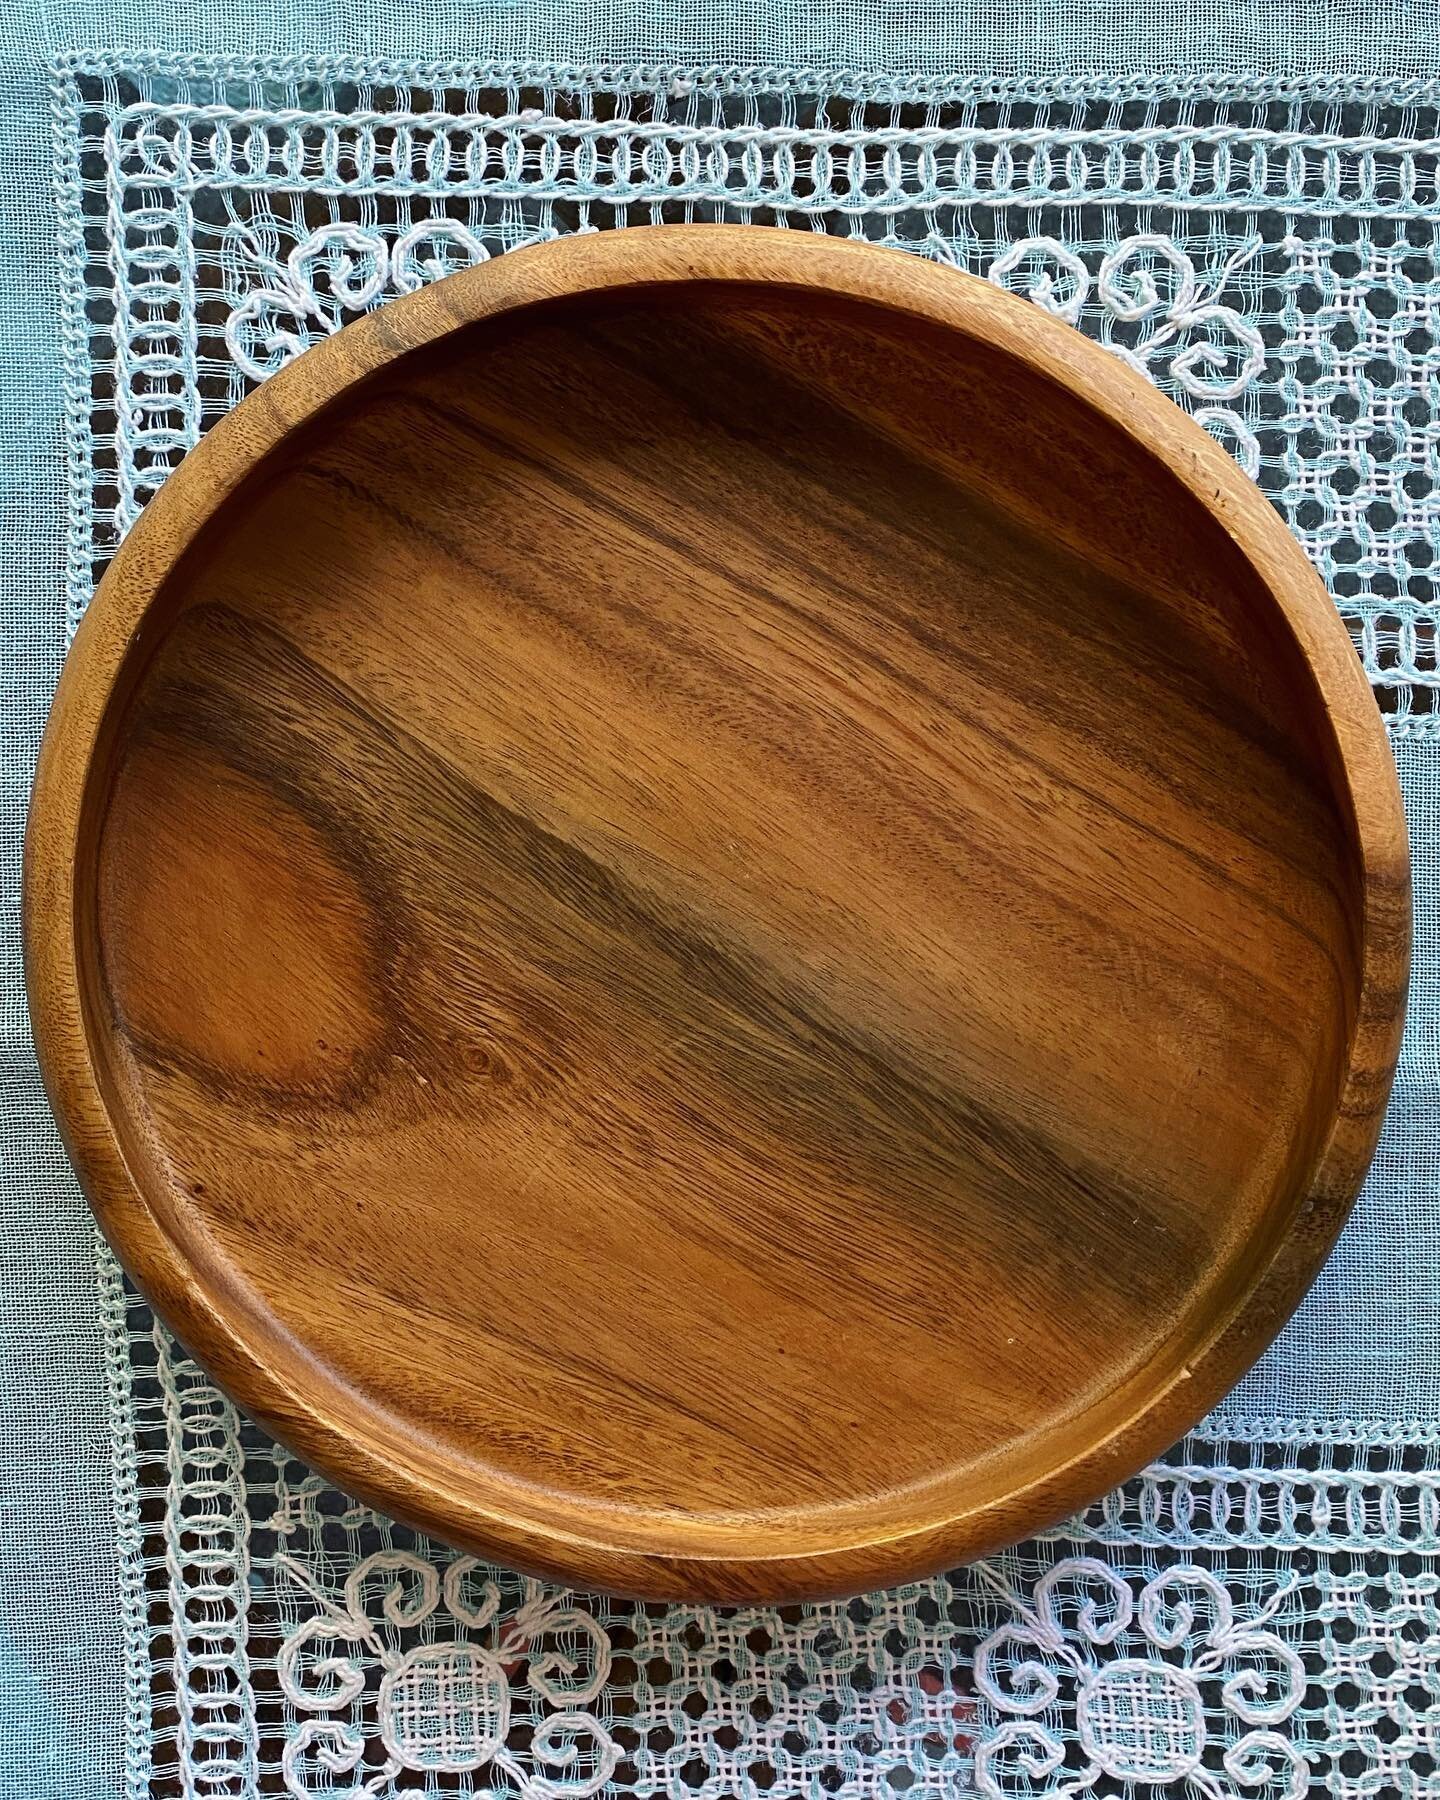 ✨FOR SALE:✨
Shallow wood bowl/tray. Another piece with beautiful wood grain! 
Purrrrrrrrfect as a tray on your kitchen counter for oil and vinegar bottles! Or as a tray anywhere else! Love this one. Perfect condition. 
12.75&rdquo; wide x 1.5&rdquo; 